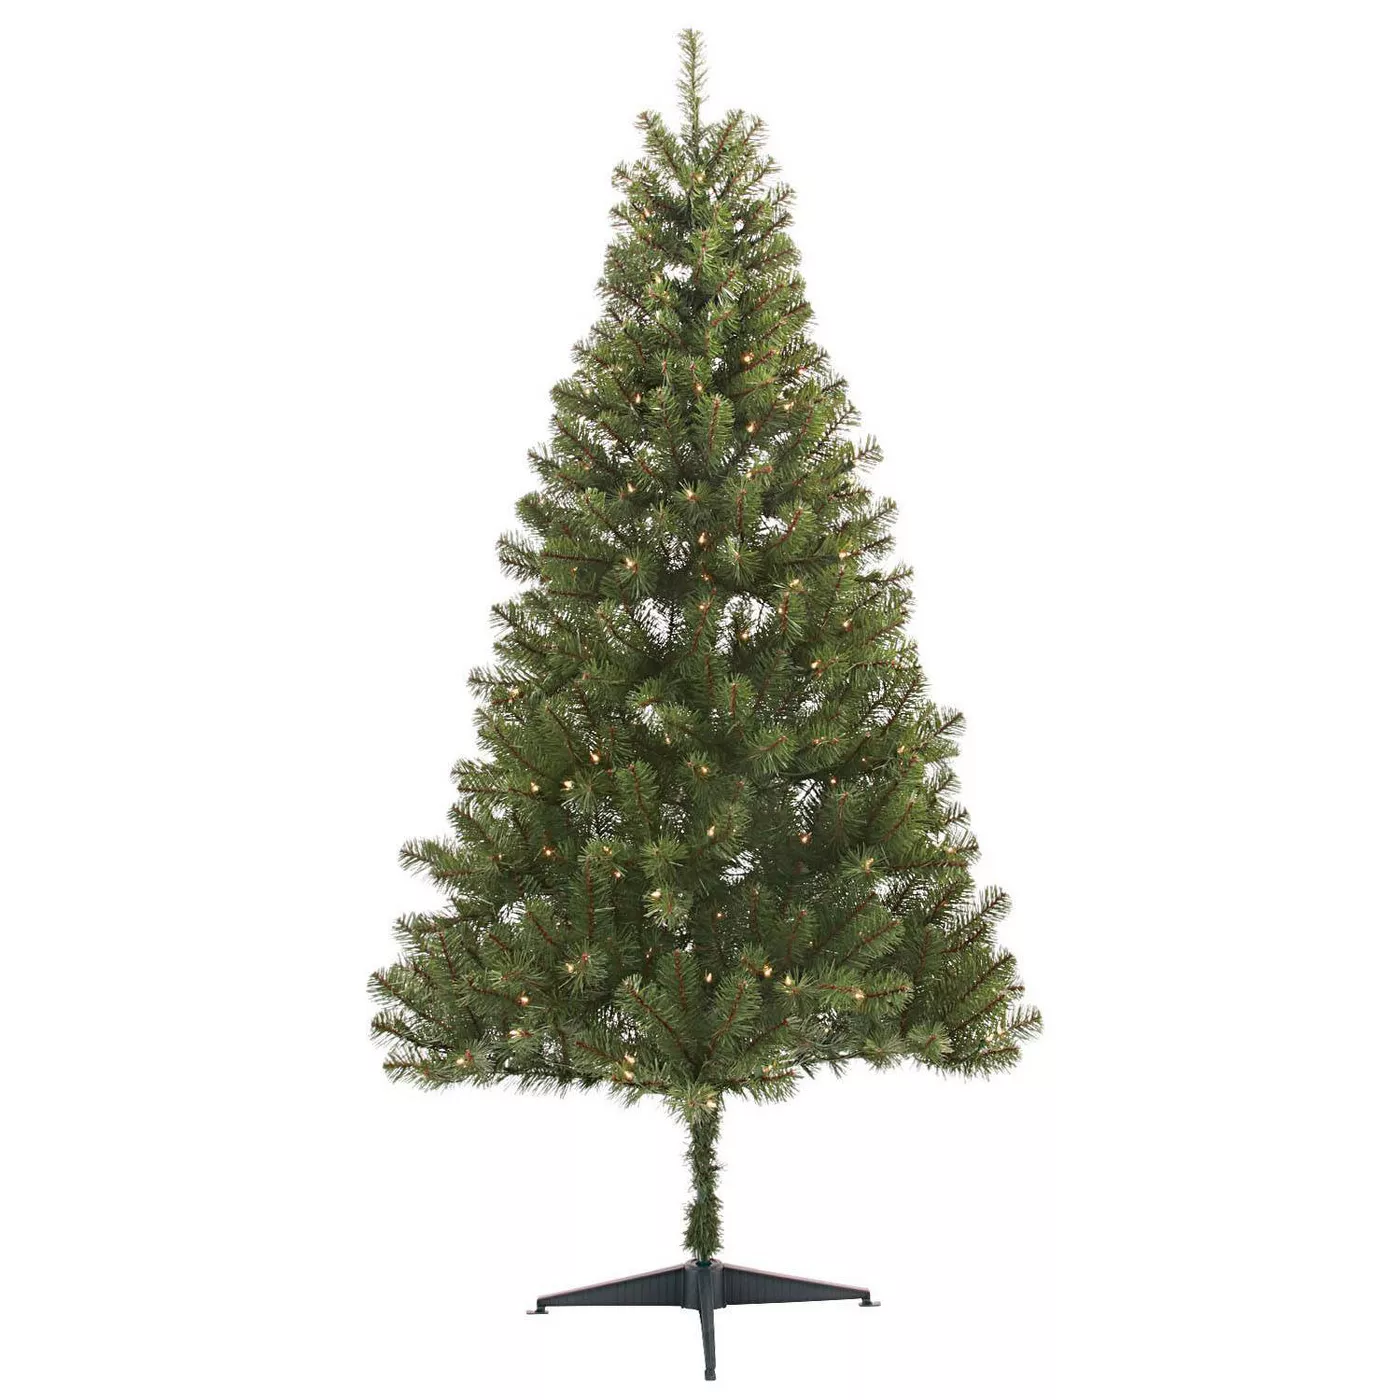 Target 6ft Pre-lit Artificial Christmas Tree Alberta Spruce Clear Lights 